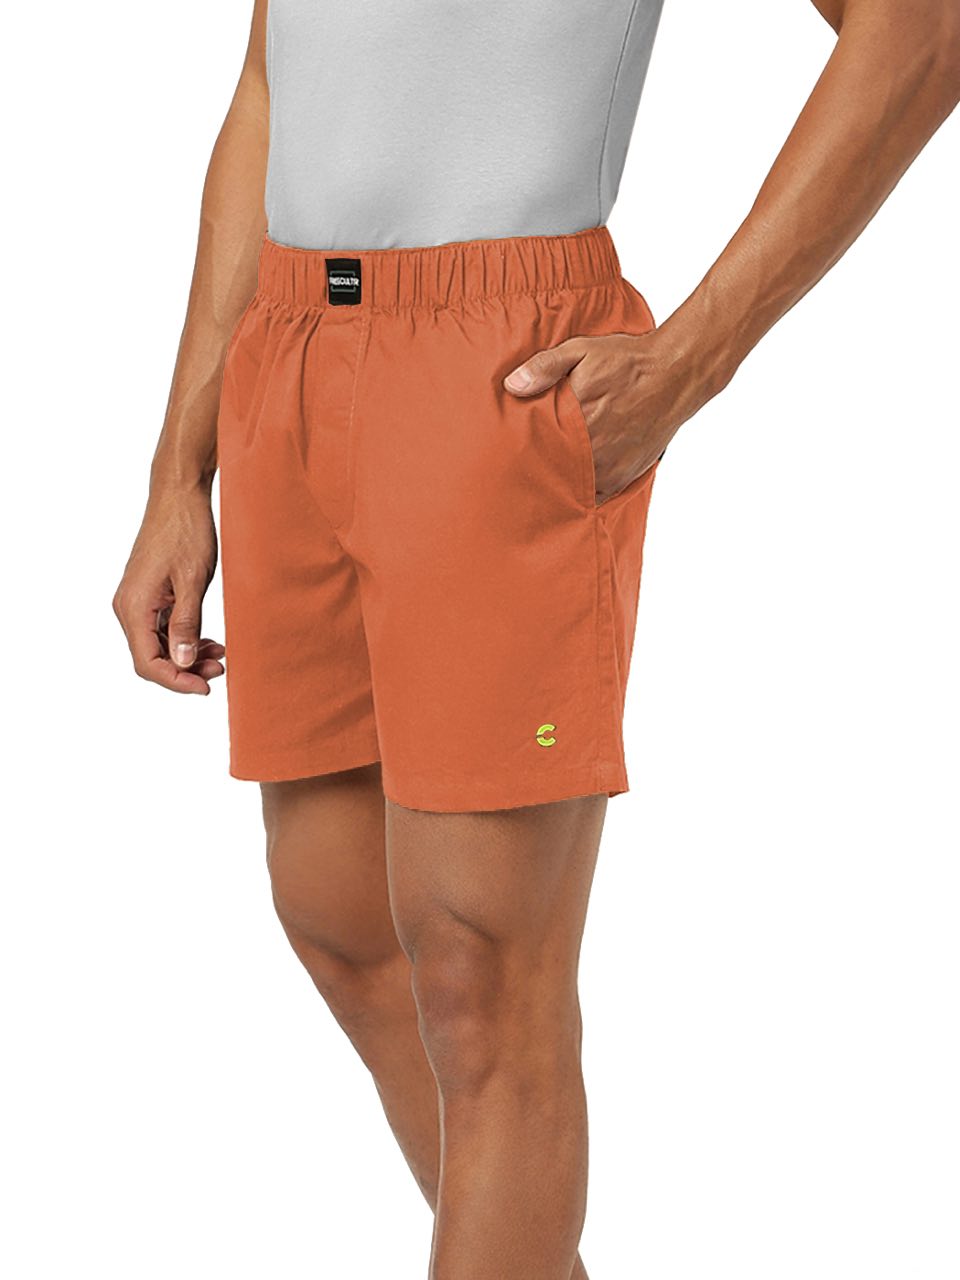 Men's Solid All-Day Boxer Shorts - (Pack of 1)